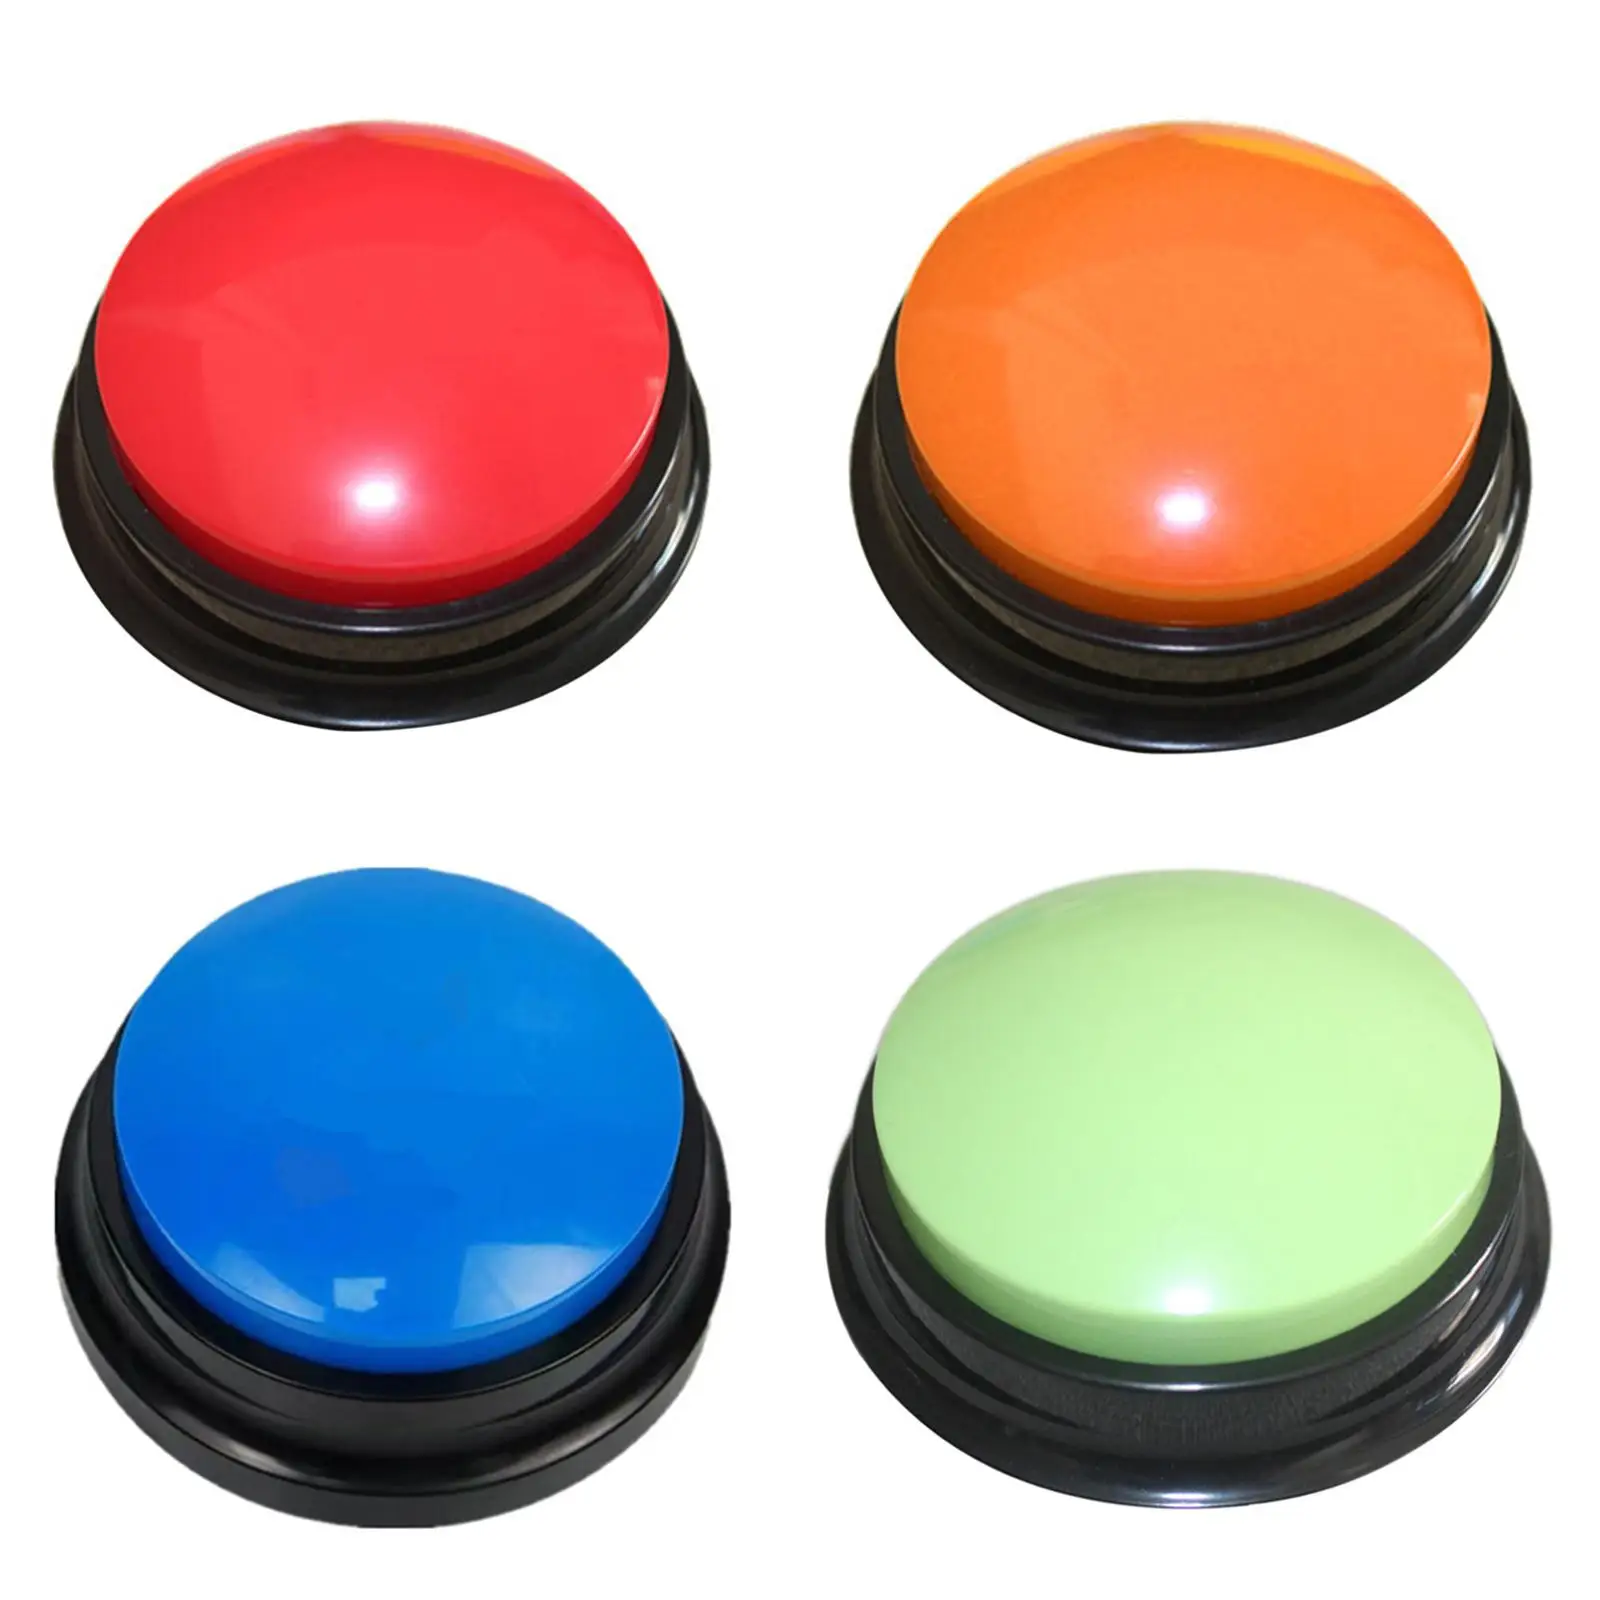 Recordable Talking Button  Sound Button Answer Buzzers Prank Toy for Home Game Boys Girls Kids Children Baby Toddlers